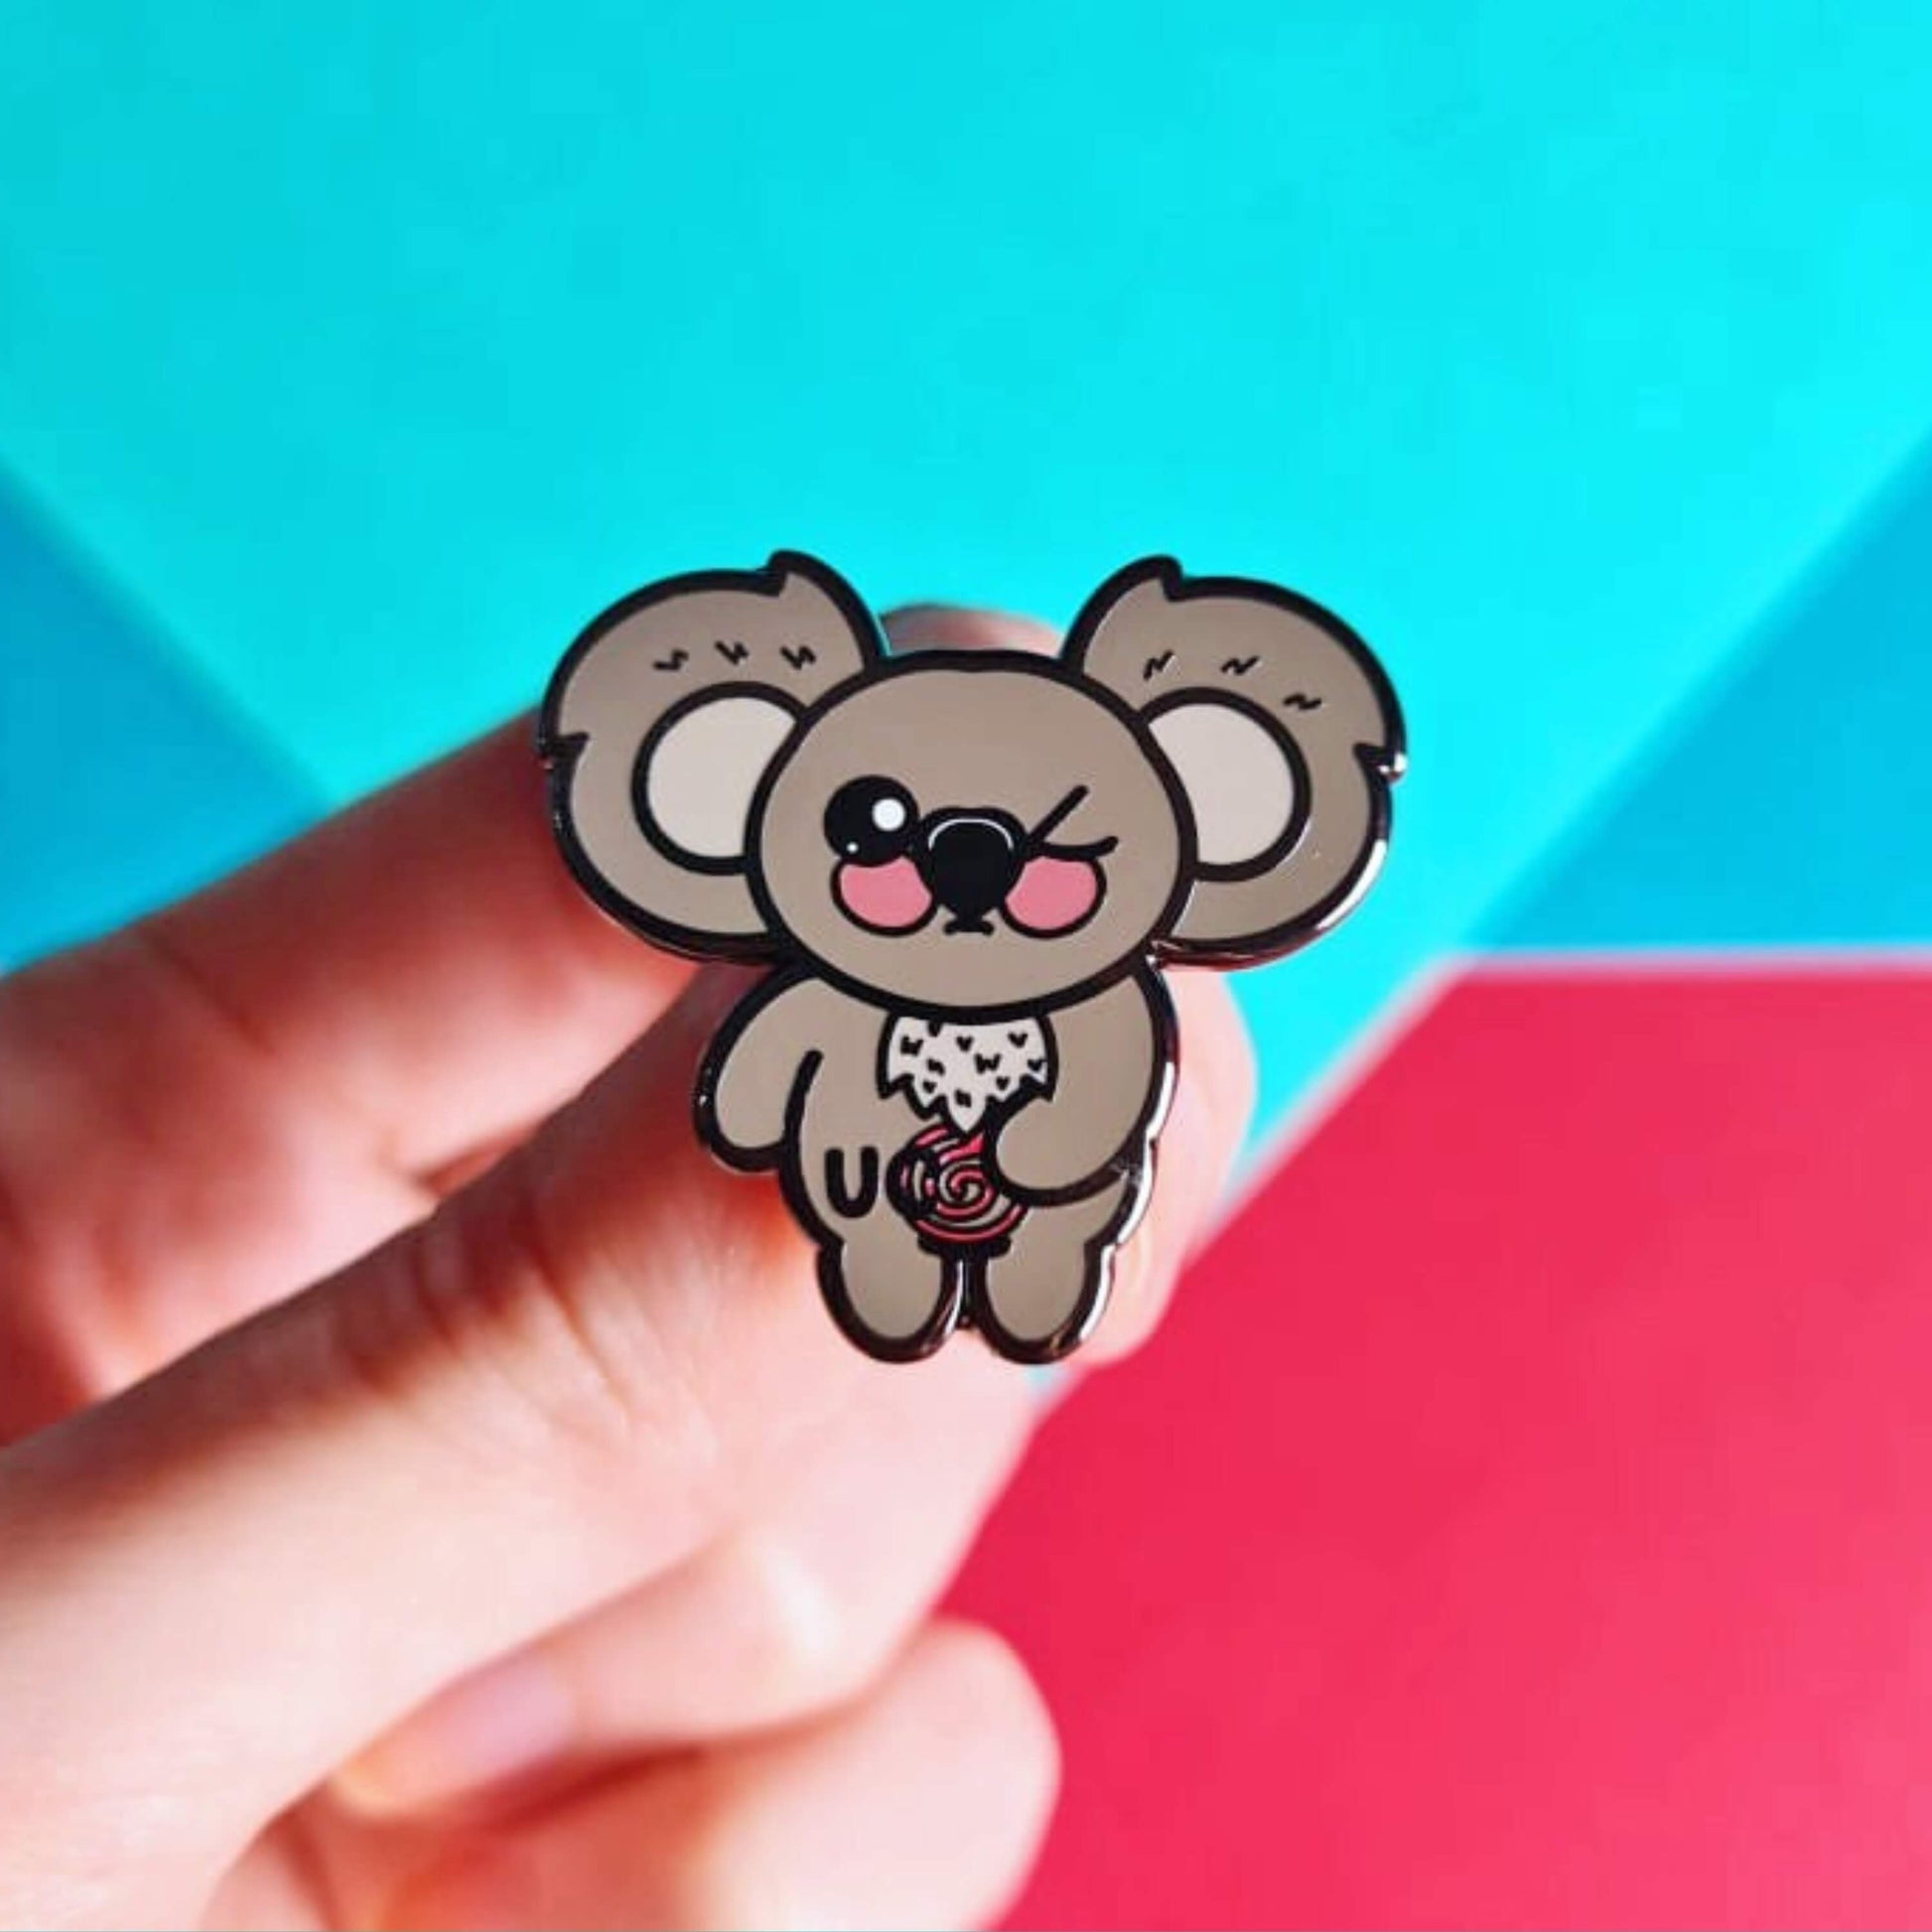 The Ulcerative Koalitis Koala Enamel Pin - Ulcerative Colitis UC held over a red and blue background. The grey koala shaped enamel pin has one eye shut clutching its red swirly tummy with black text over it reading 'UC'. The hand drawn design is raising awareness for Ulcerative Colitis UC.